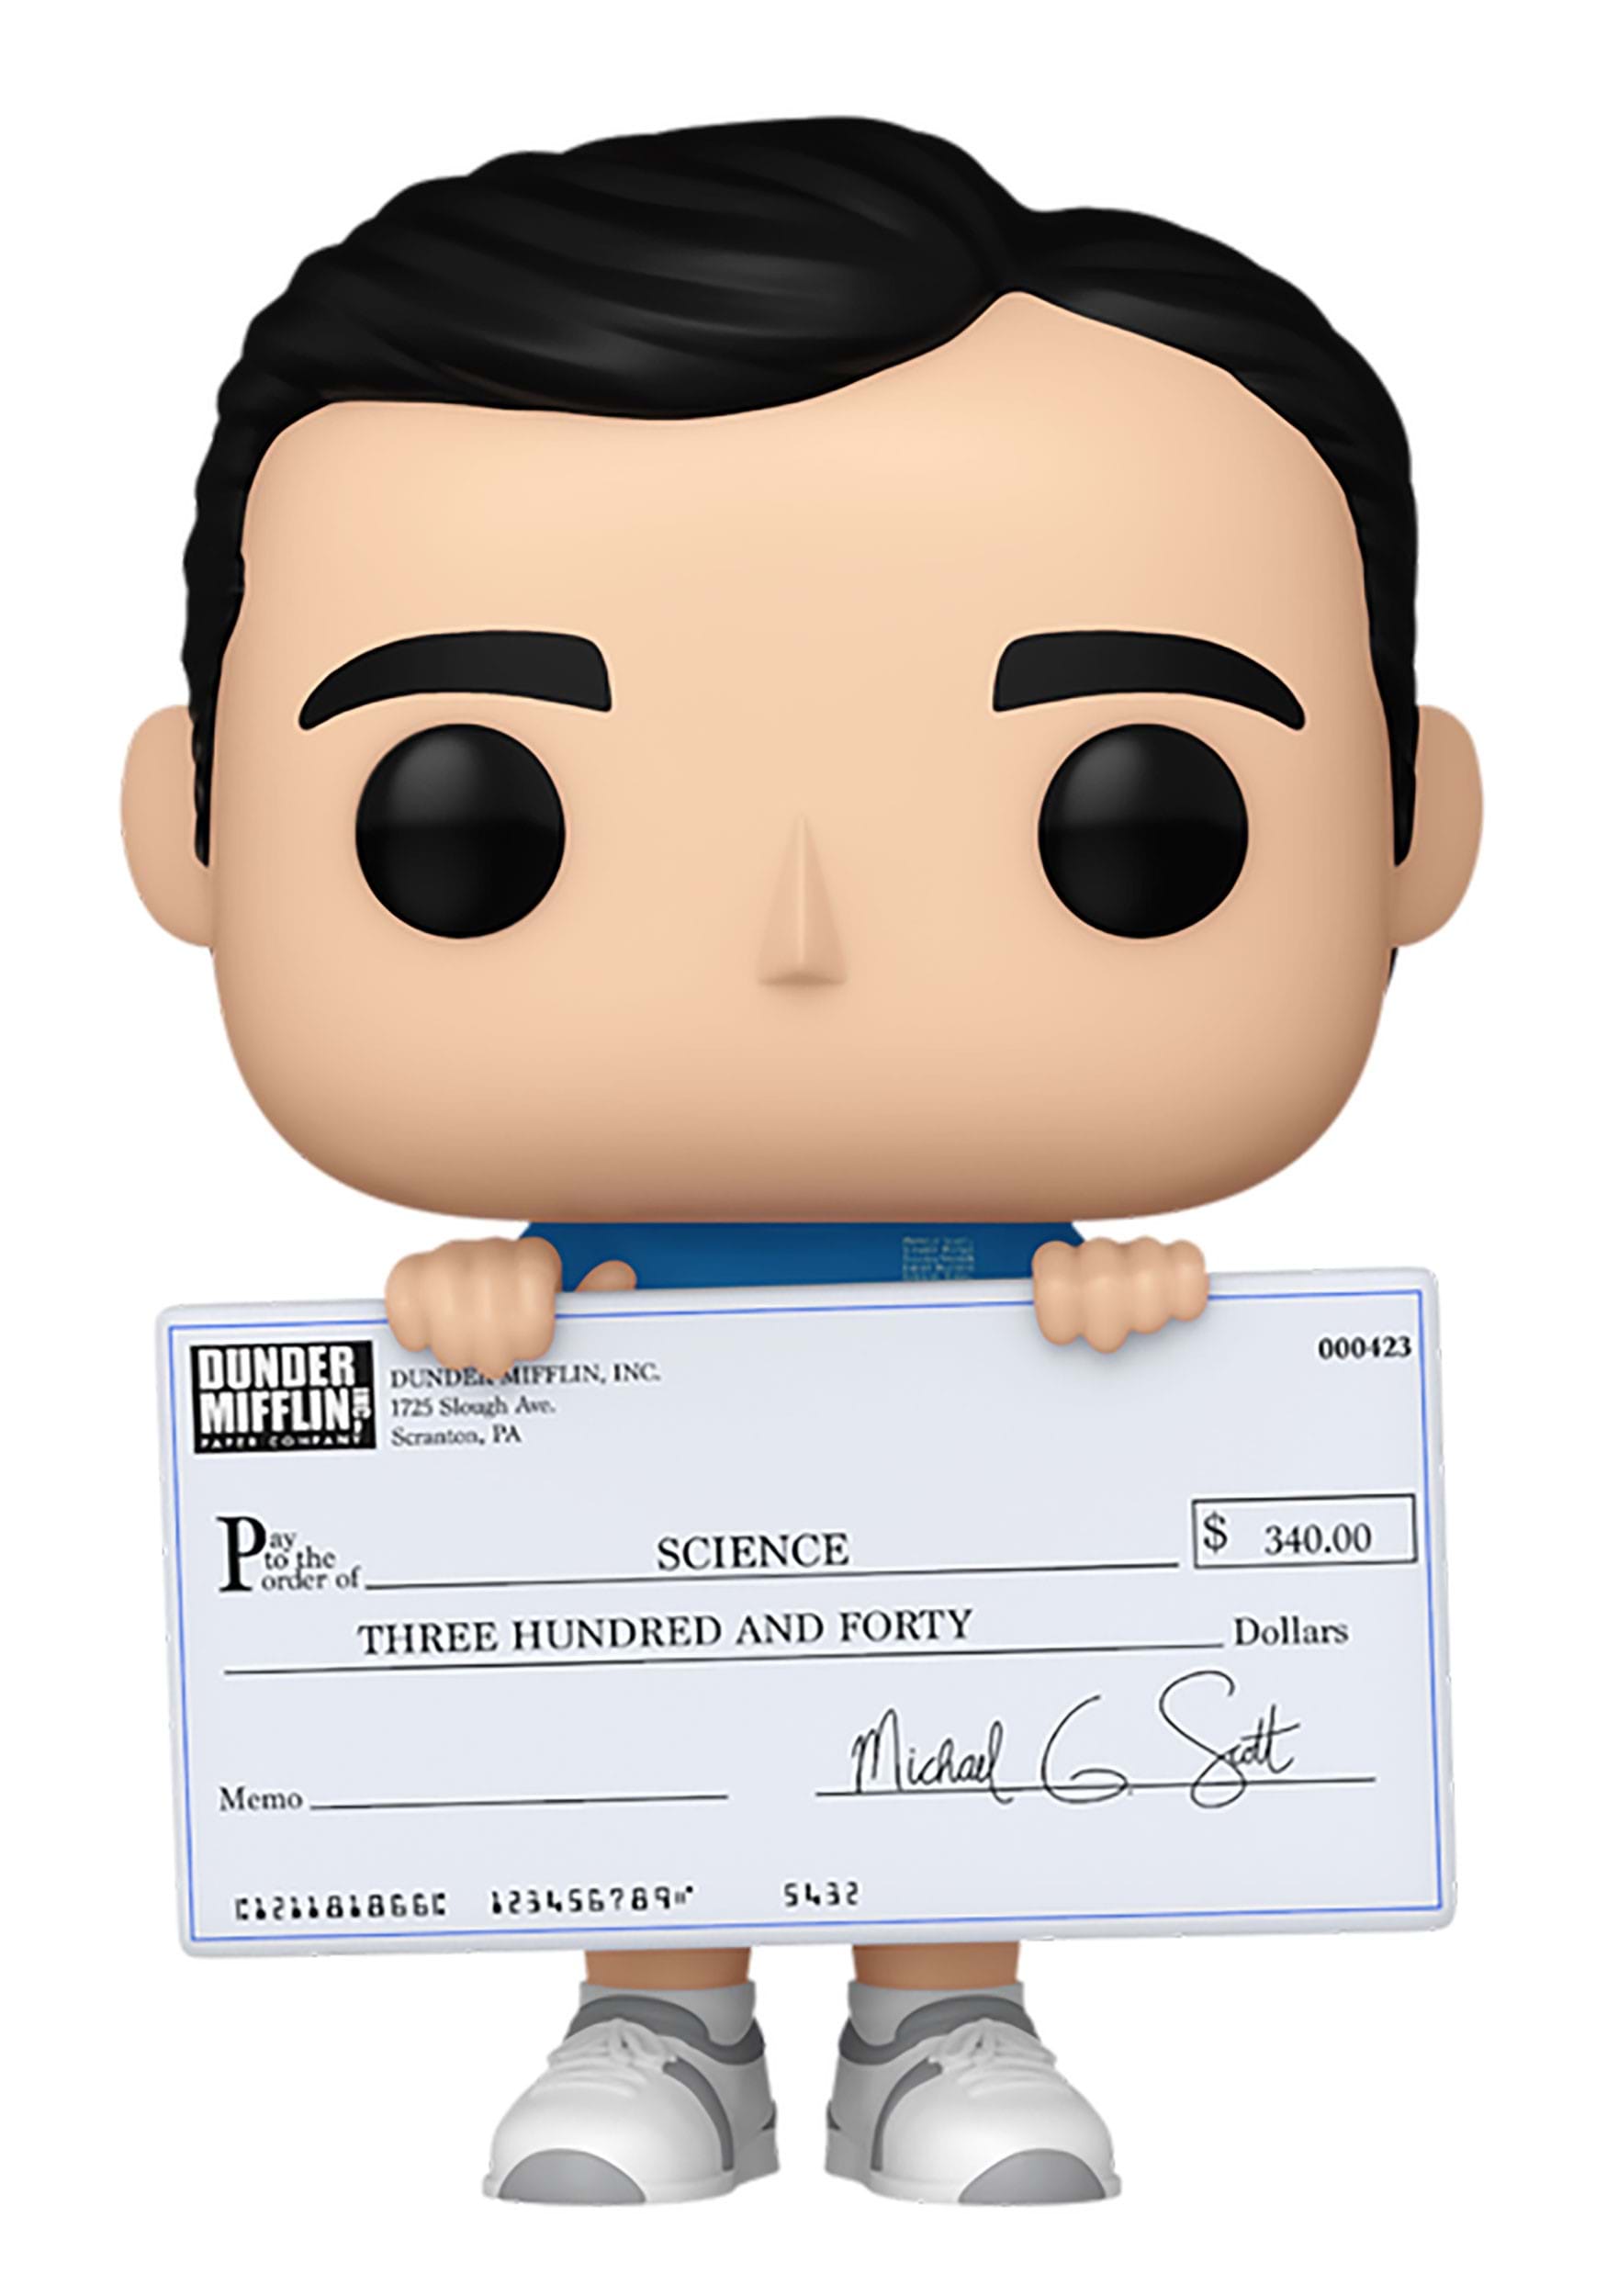 Photos - Fancy Dress Funko POP Vinyl  POP! TV: The Office - Michael with Check | The Offic 